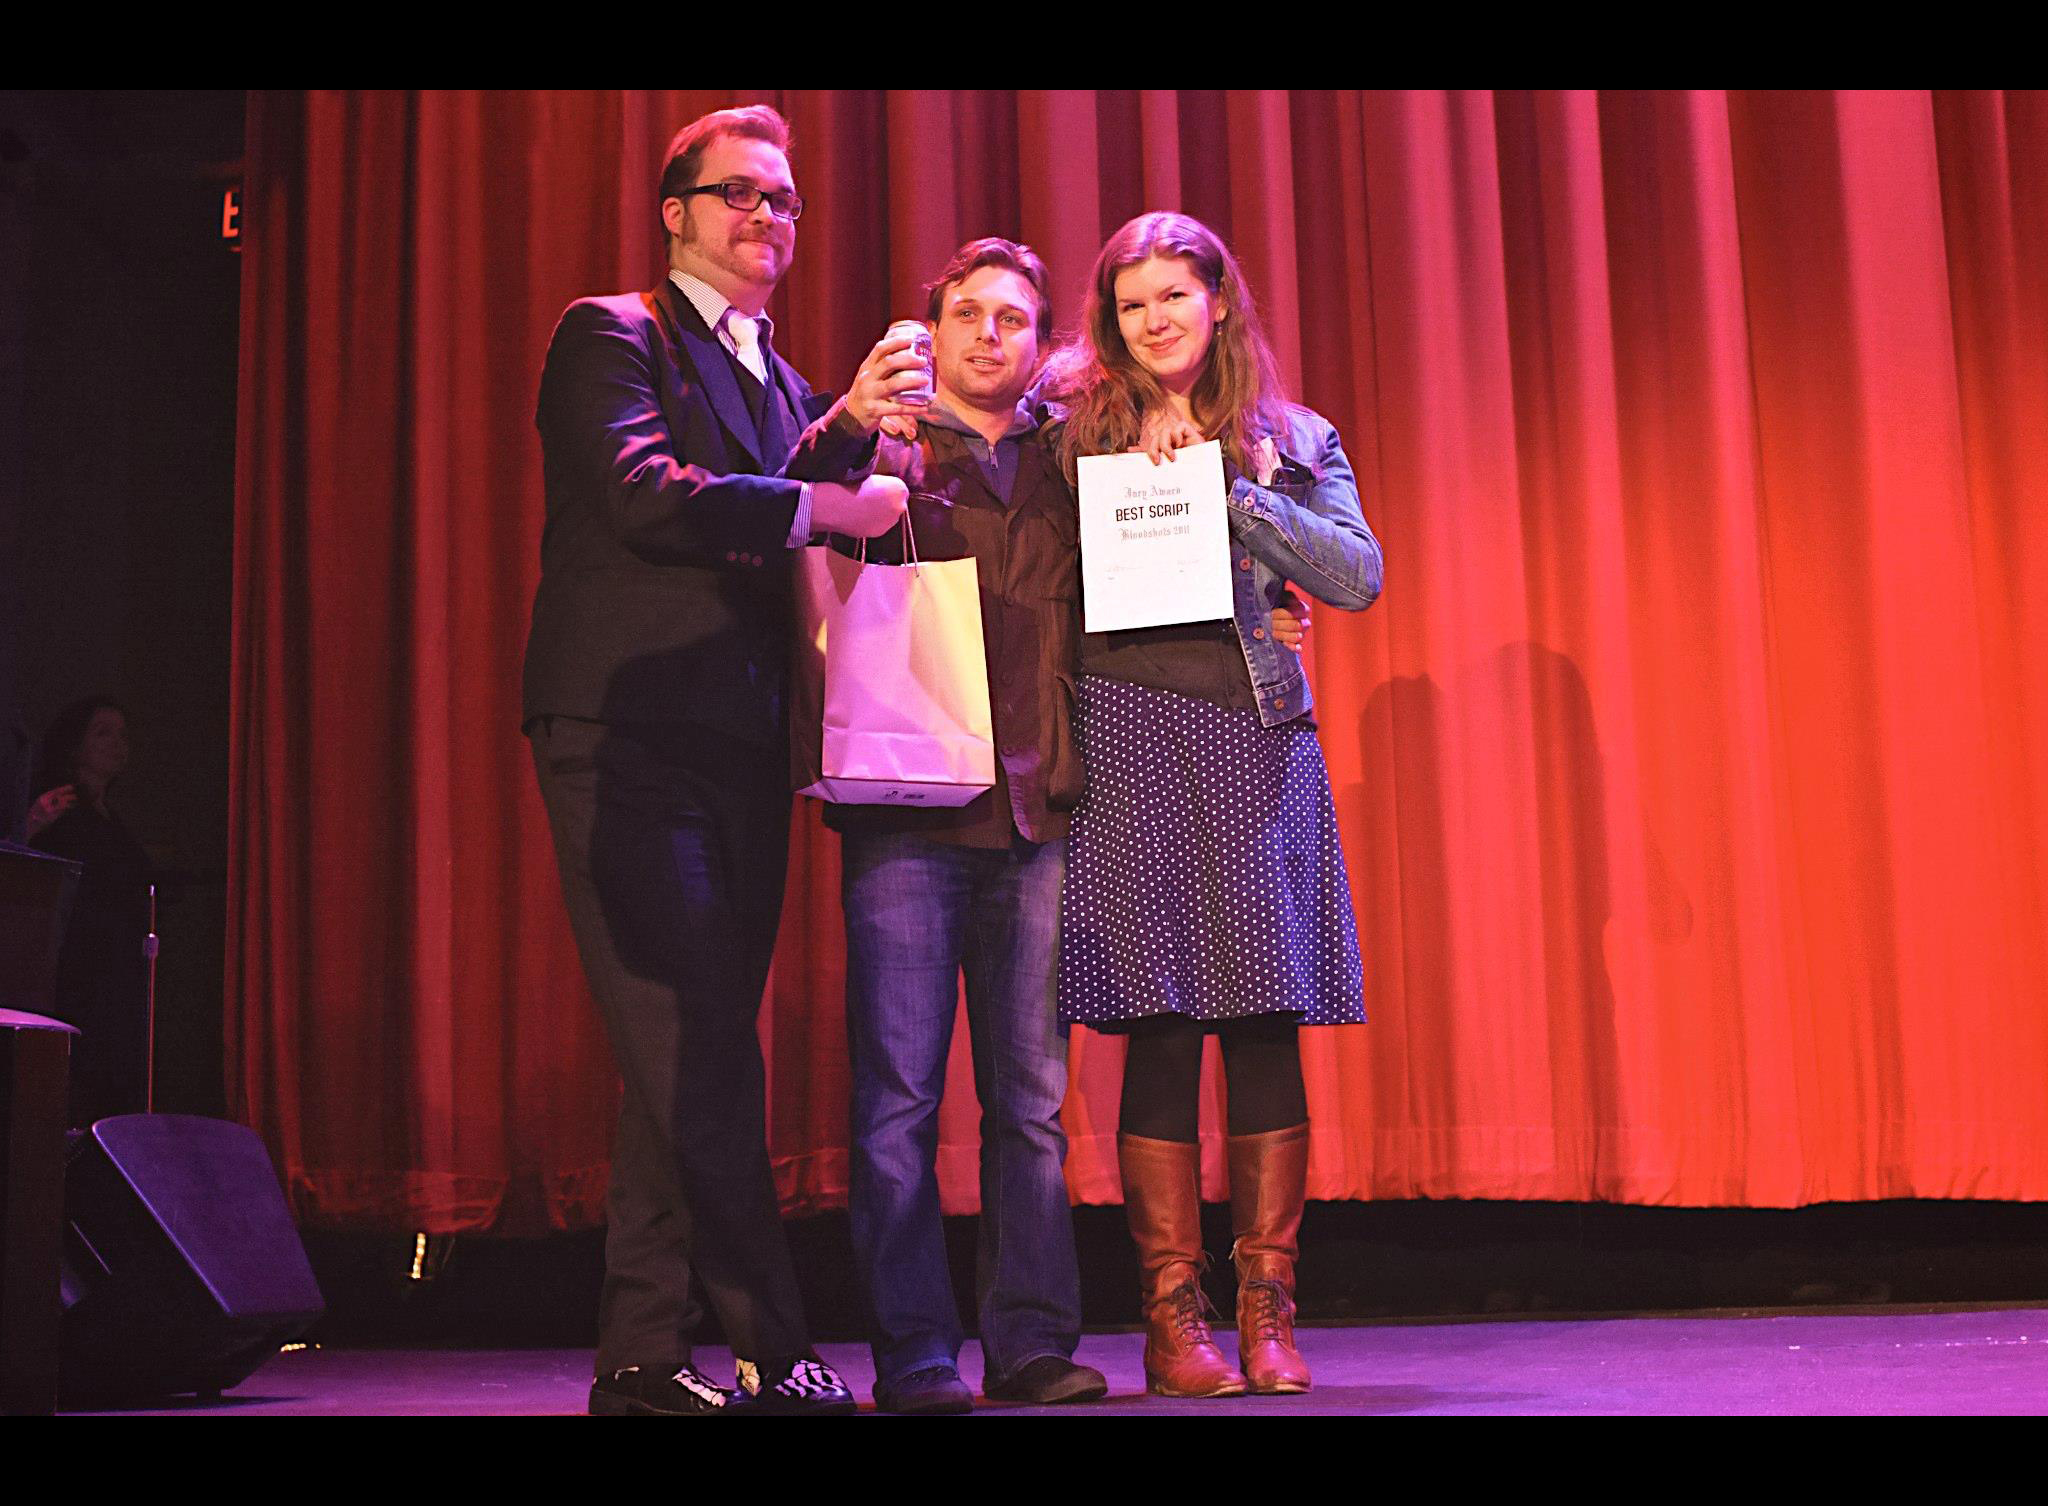 Conor Gomez (middle) with Nancy Shaw and Tyler James Nichol accepting the Award for 'Best Script' at the 2011 Bloodshots Film Festival. Photo taken at the historic Rio Theater in Vancouver, BC.